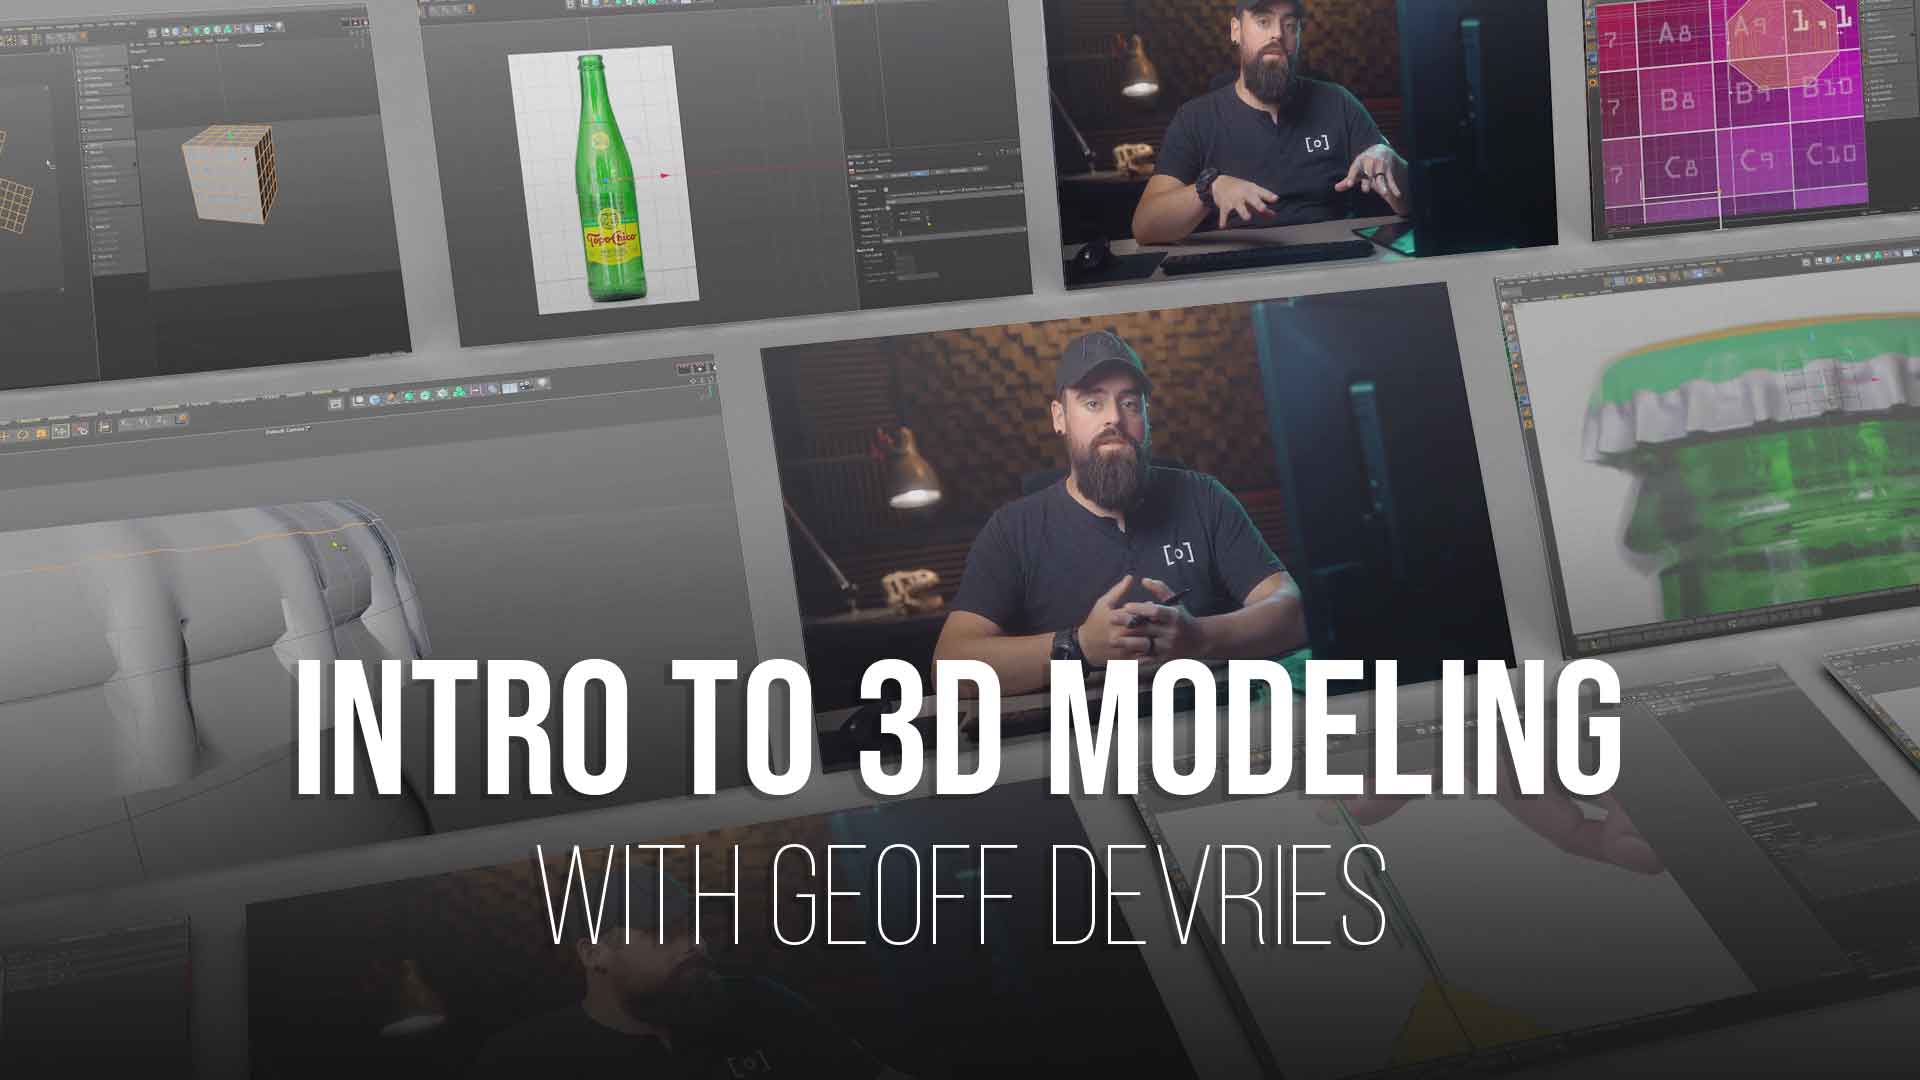 Intro to 3D Modeling in CGI with modeler geoff devries from PRO EDU